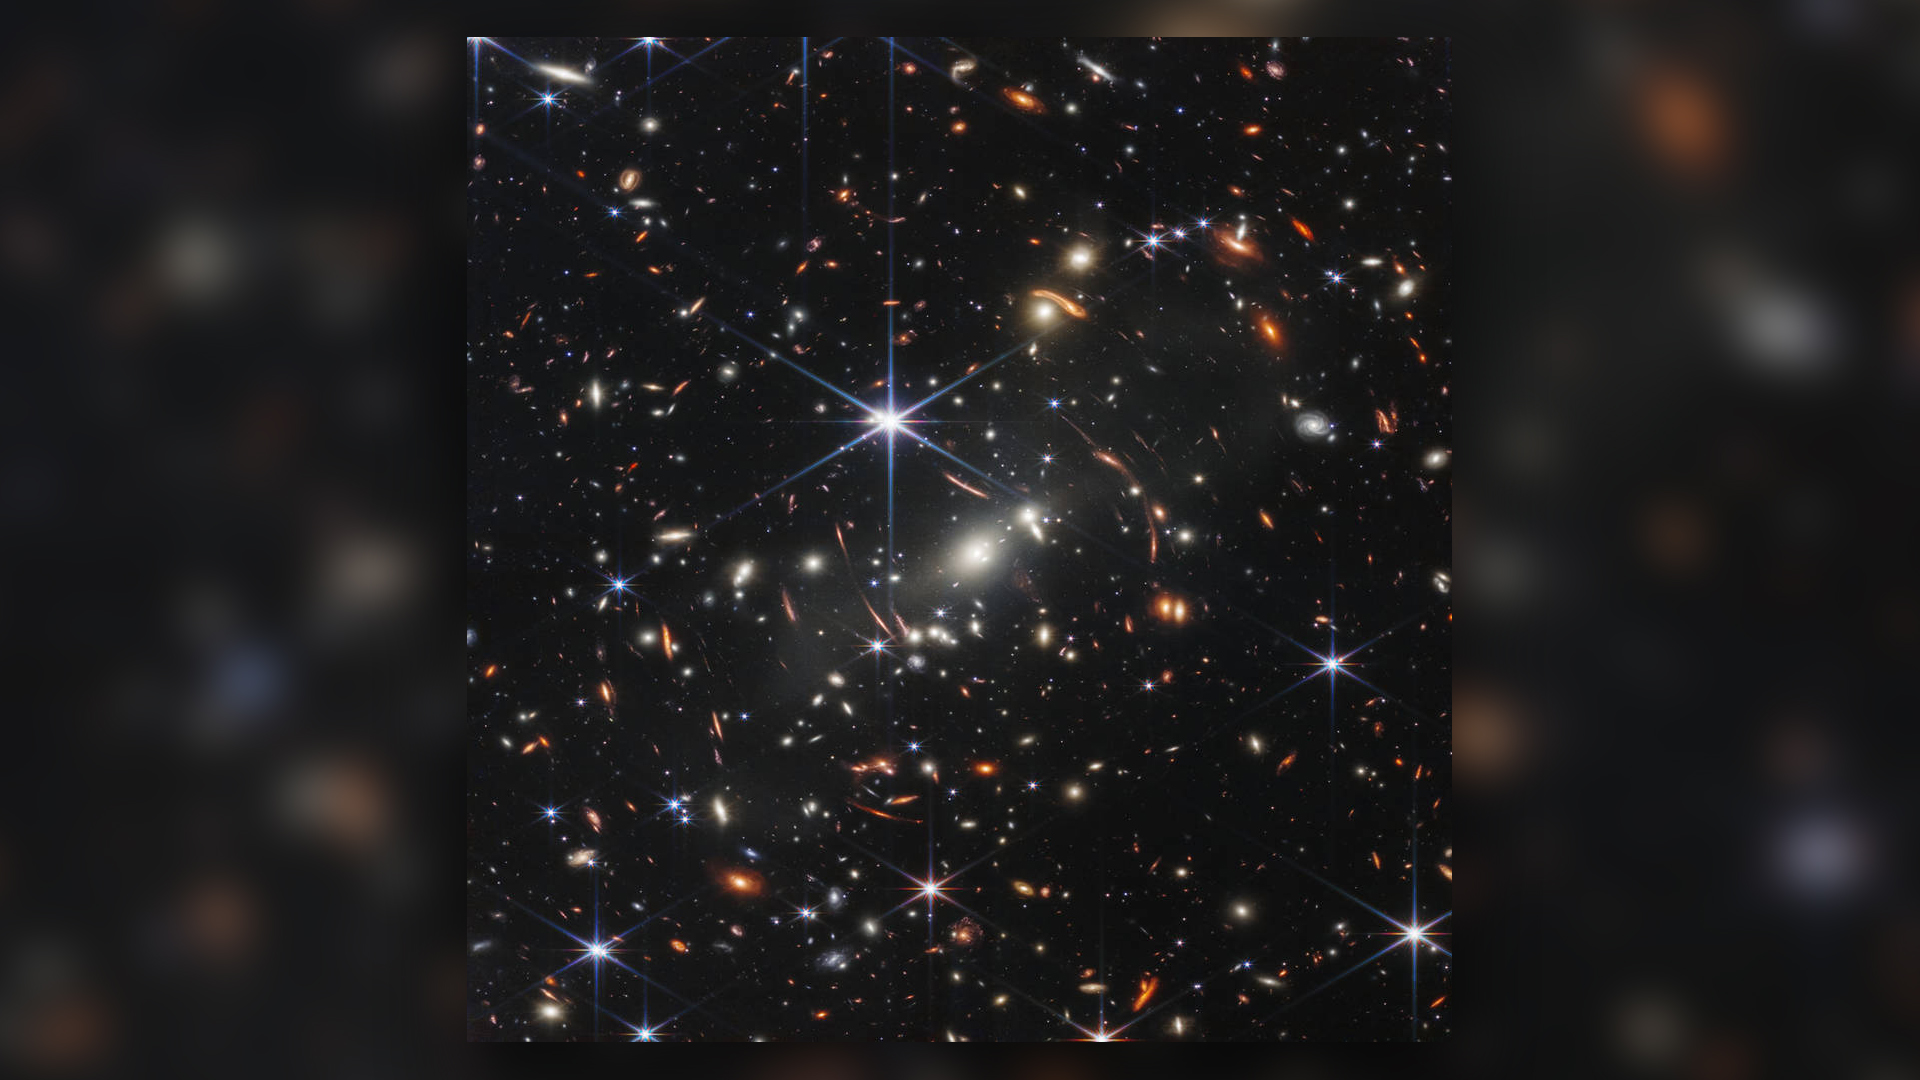 NASA’s James Webb Space Telescope has produced the deepest and sharpest infrared image of the distant universe to date. Known as Webb’s First Deep Field, this image of galaxy cluster SMACS 0723 is overflowing with detail.